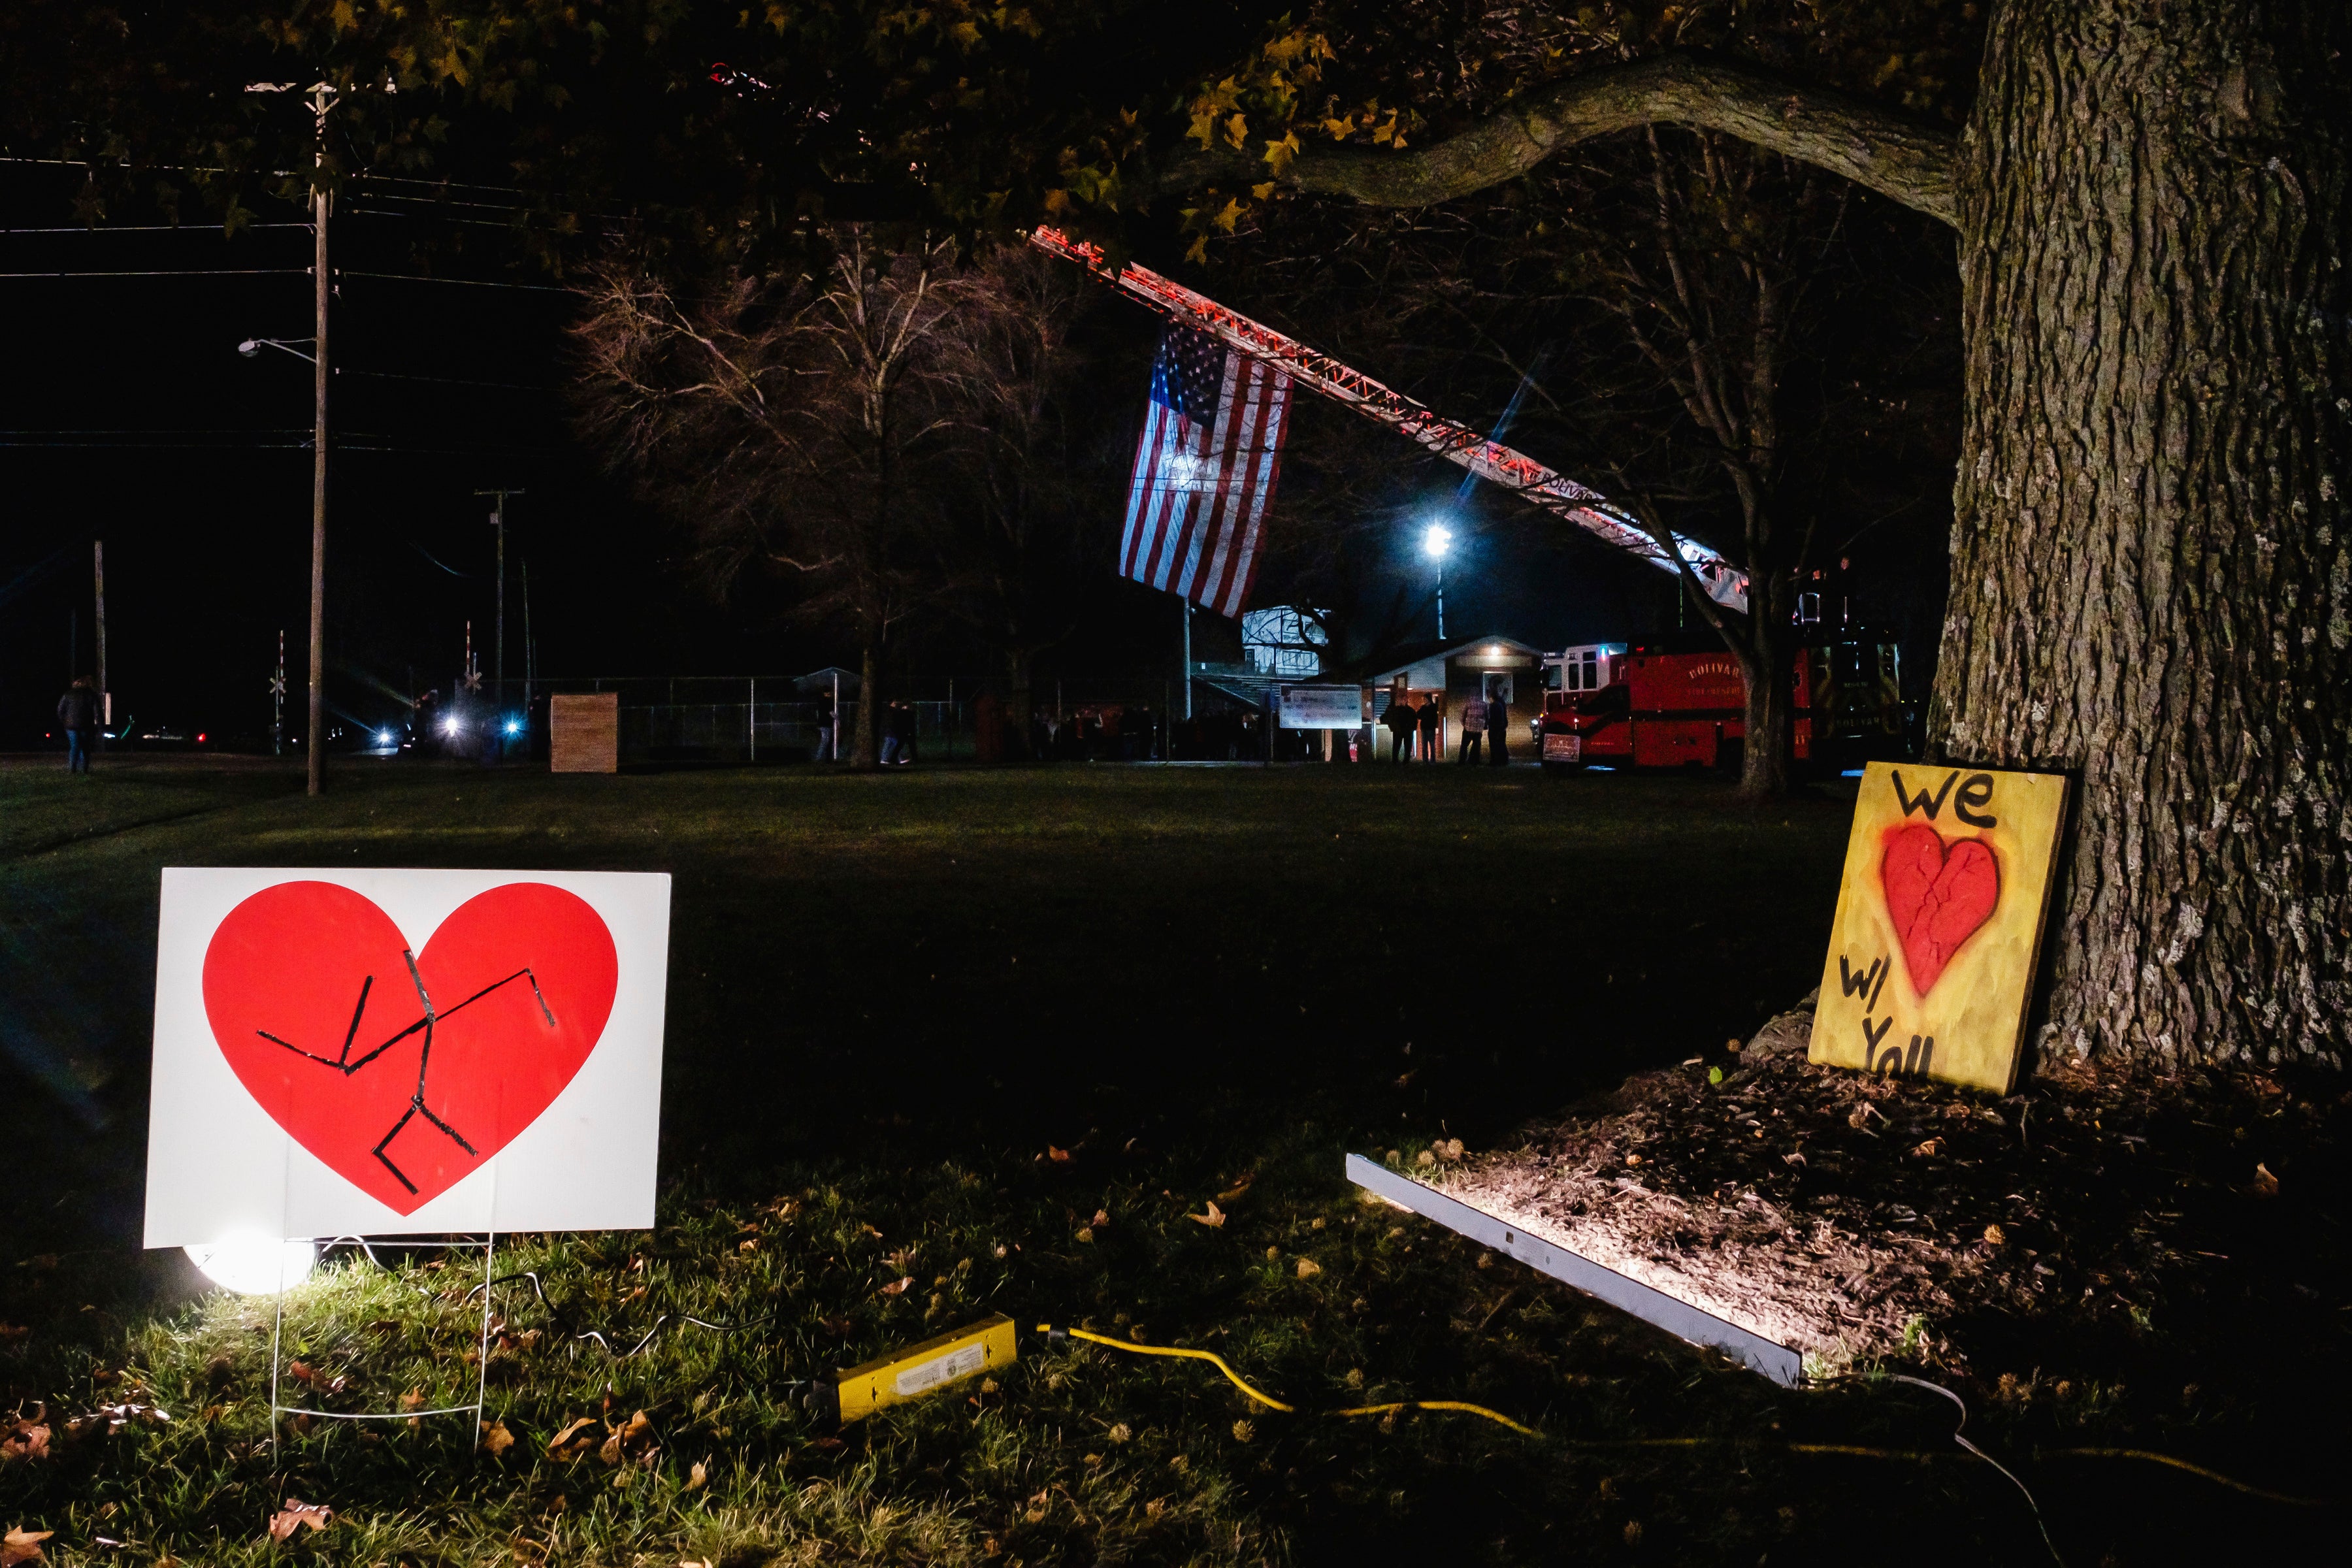 Signs in support of the Tusky Valley Schools community can be seen in front of the elementary school shortly before a community prayer vigil